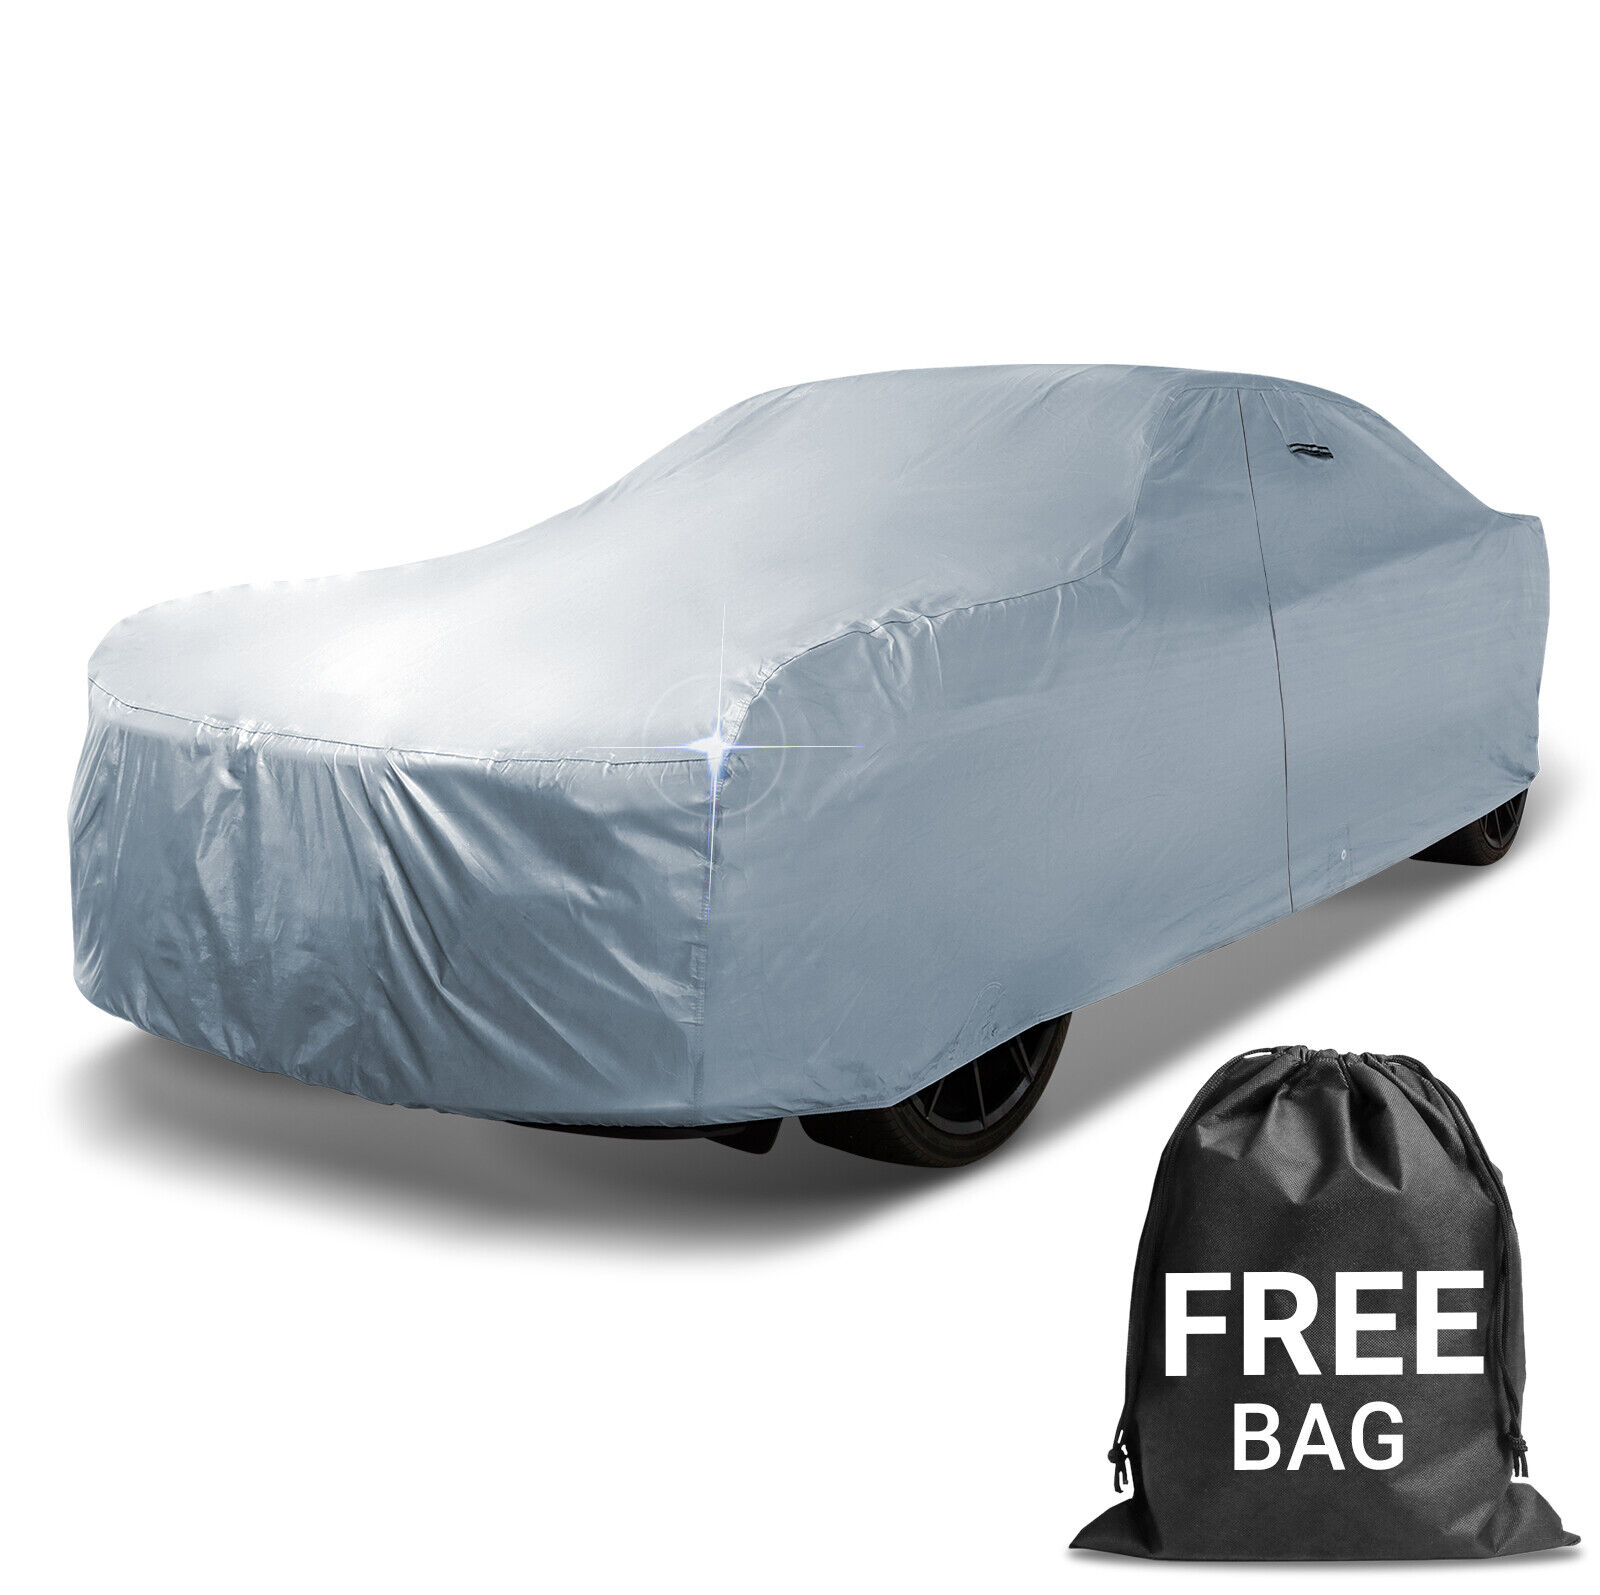 CHEVY [IMPALA] Custom Waterproof Outdoor Car Cover - 100% All Weather Protection